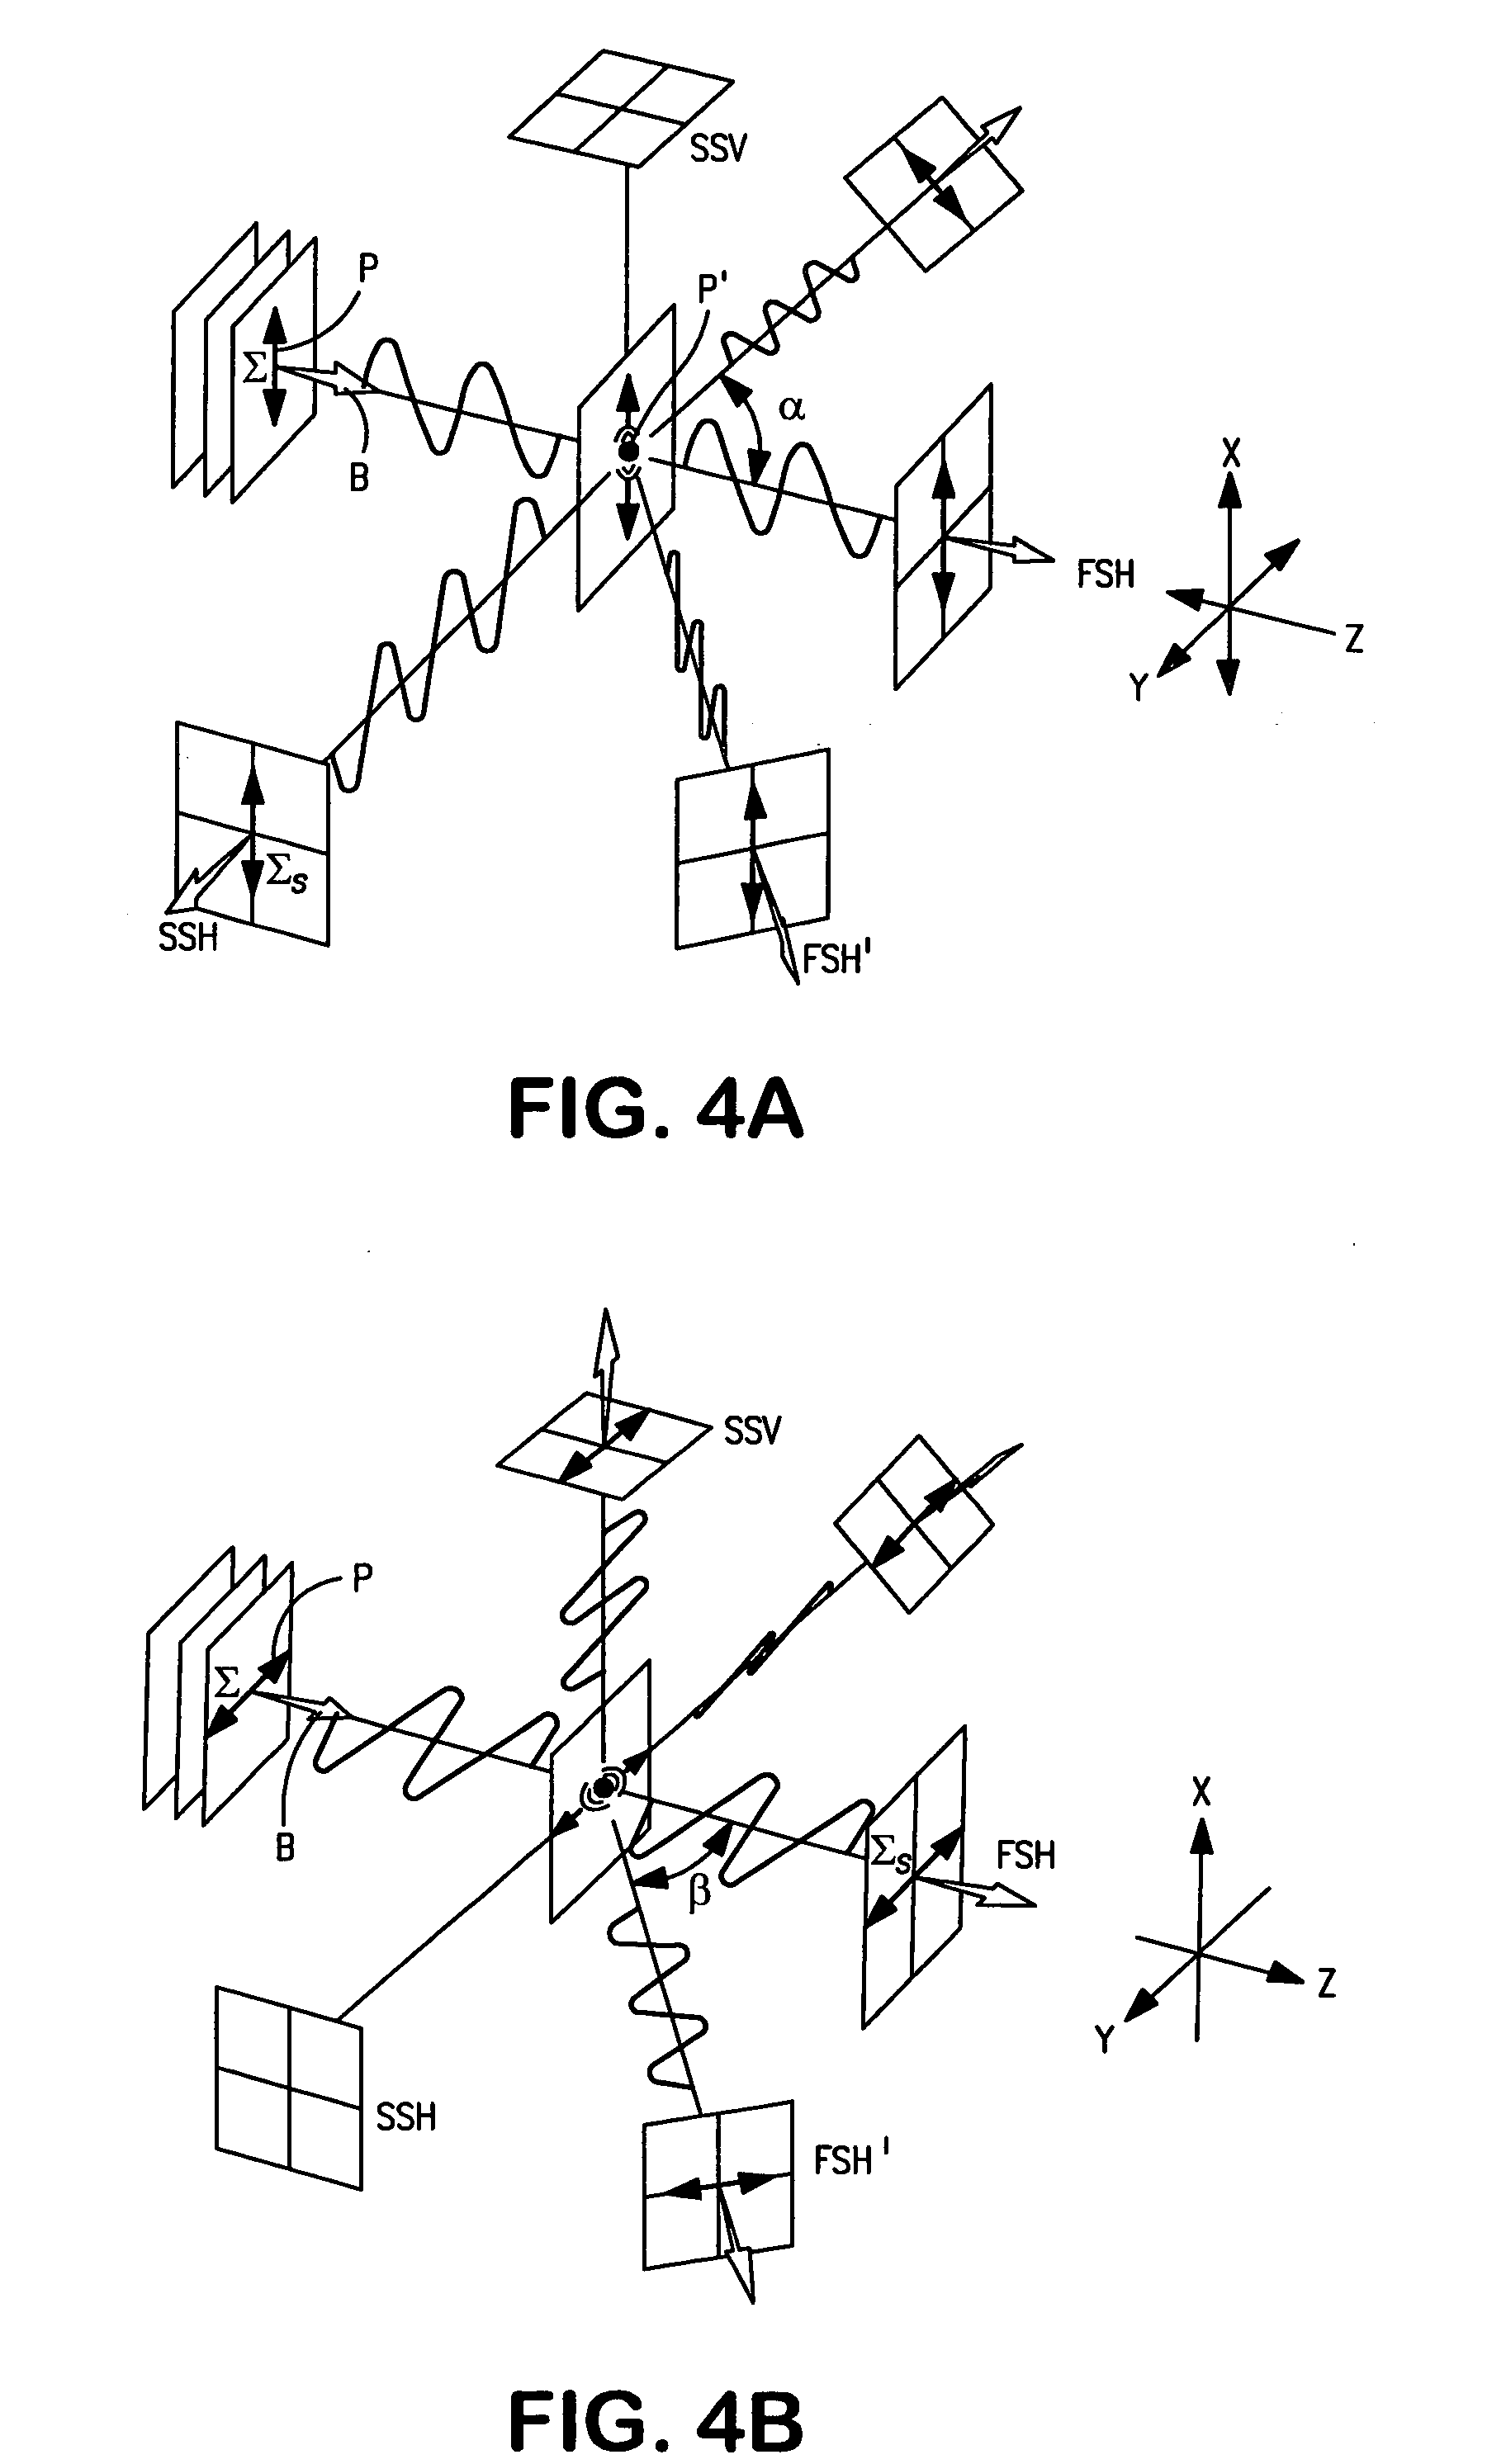 Flow cytometer for differentiating small particles in suspension